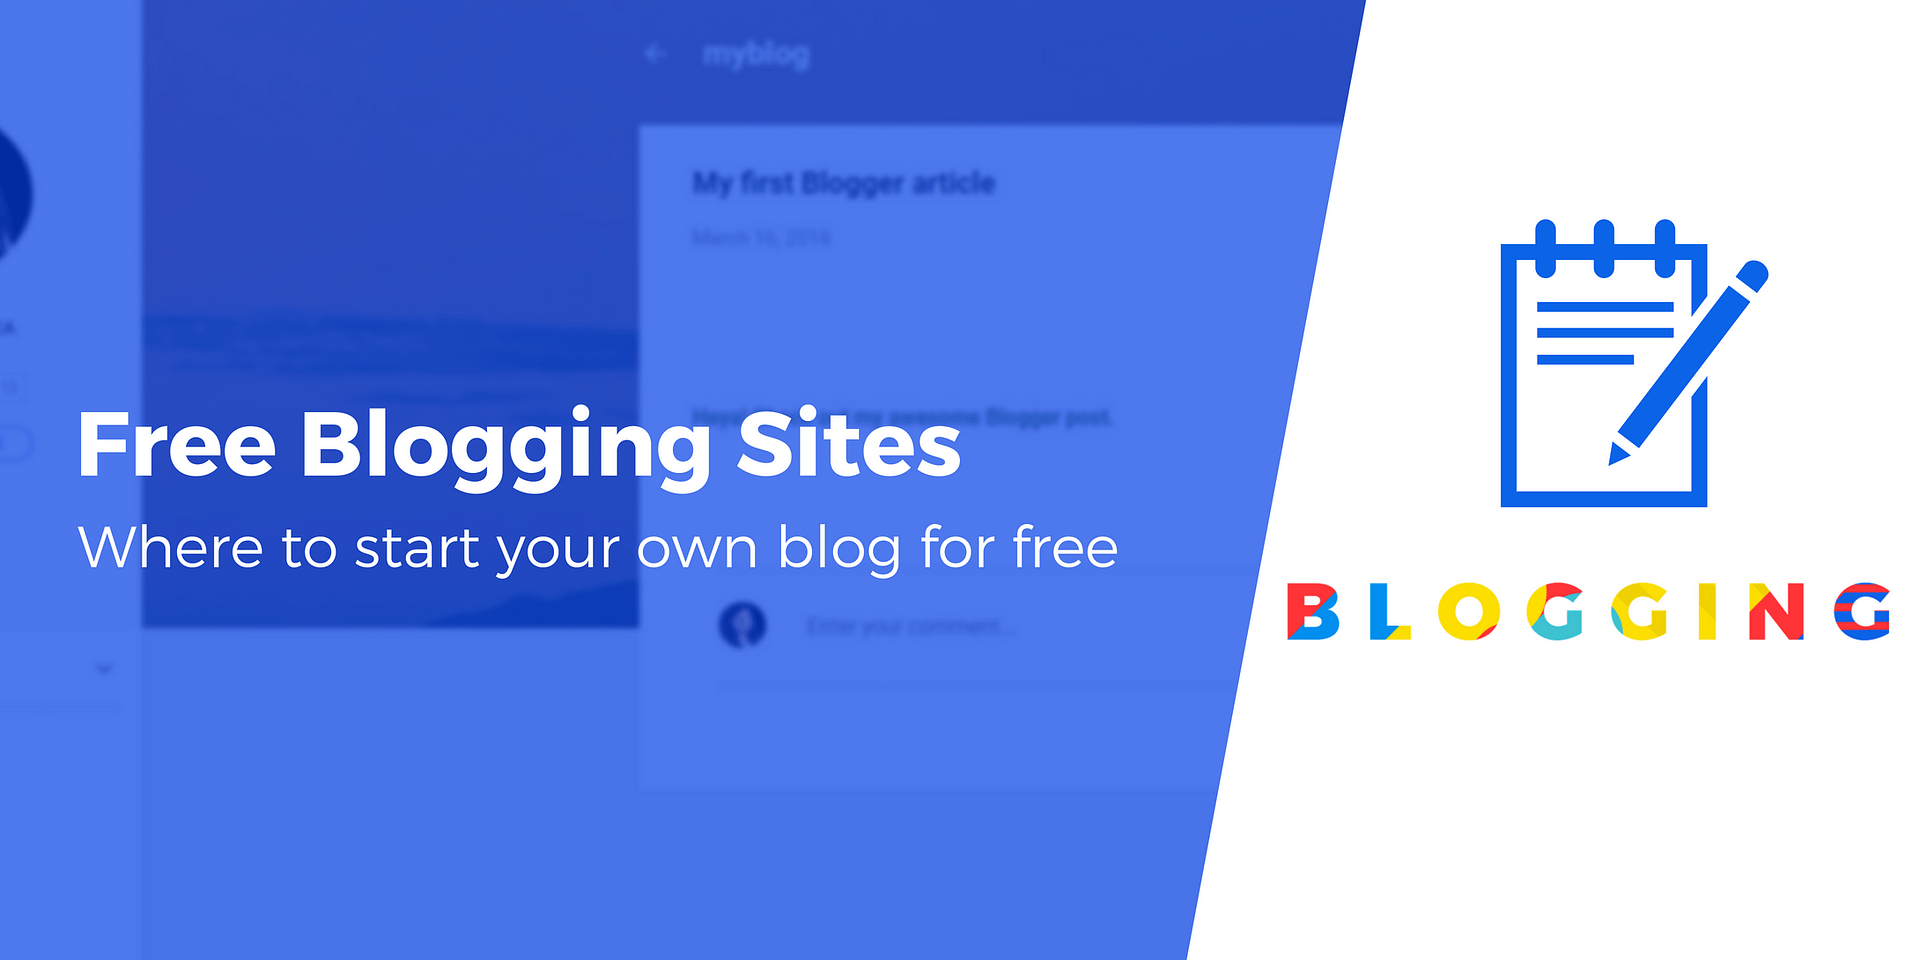 World to Build Blog - Blogs, news, announcements and more.